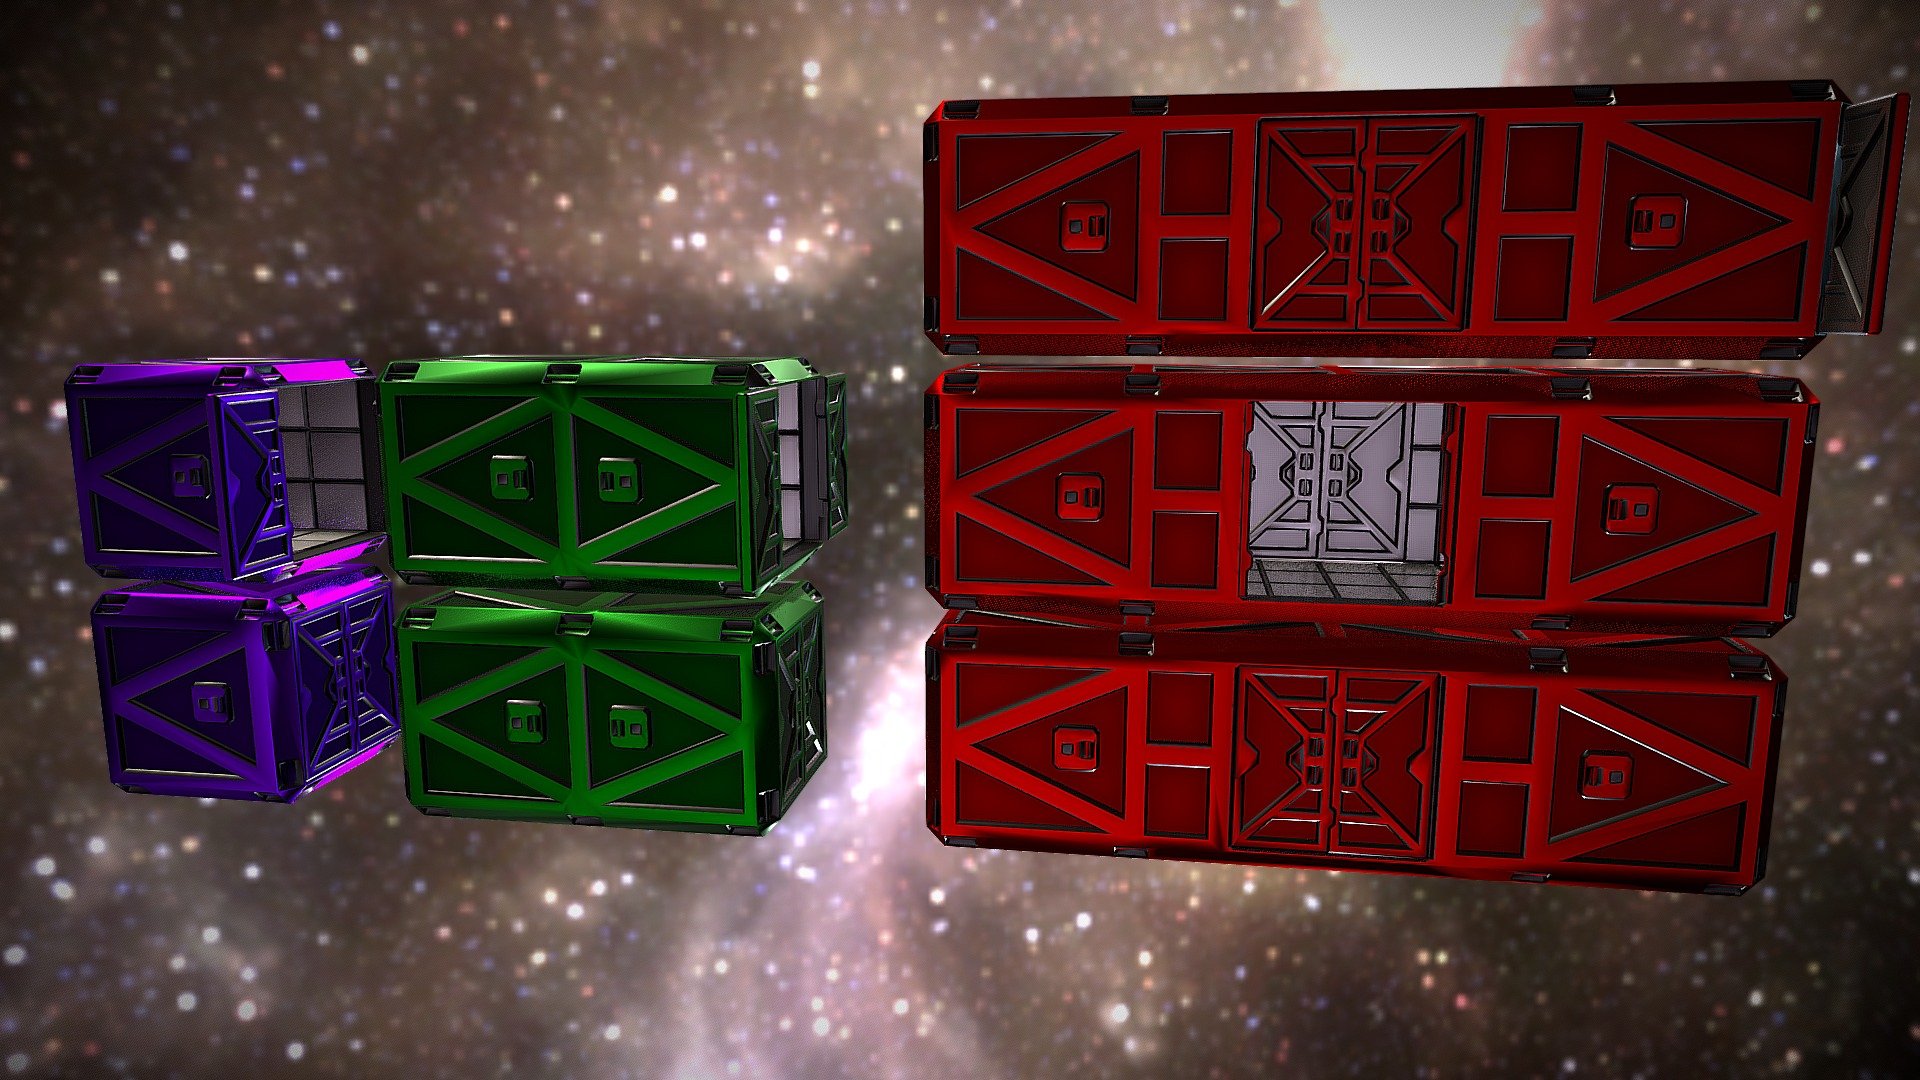 [STANDARDIZED SPACE CARGO CONTAINERS]